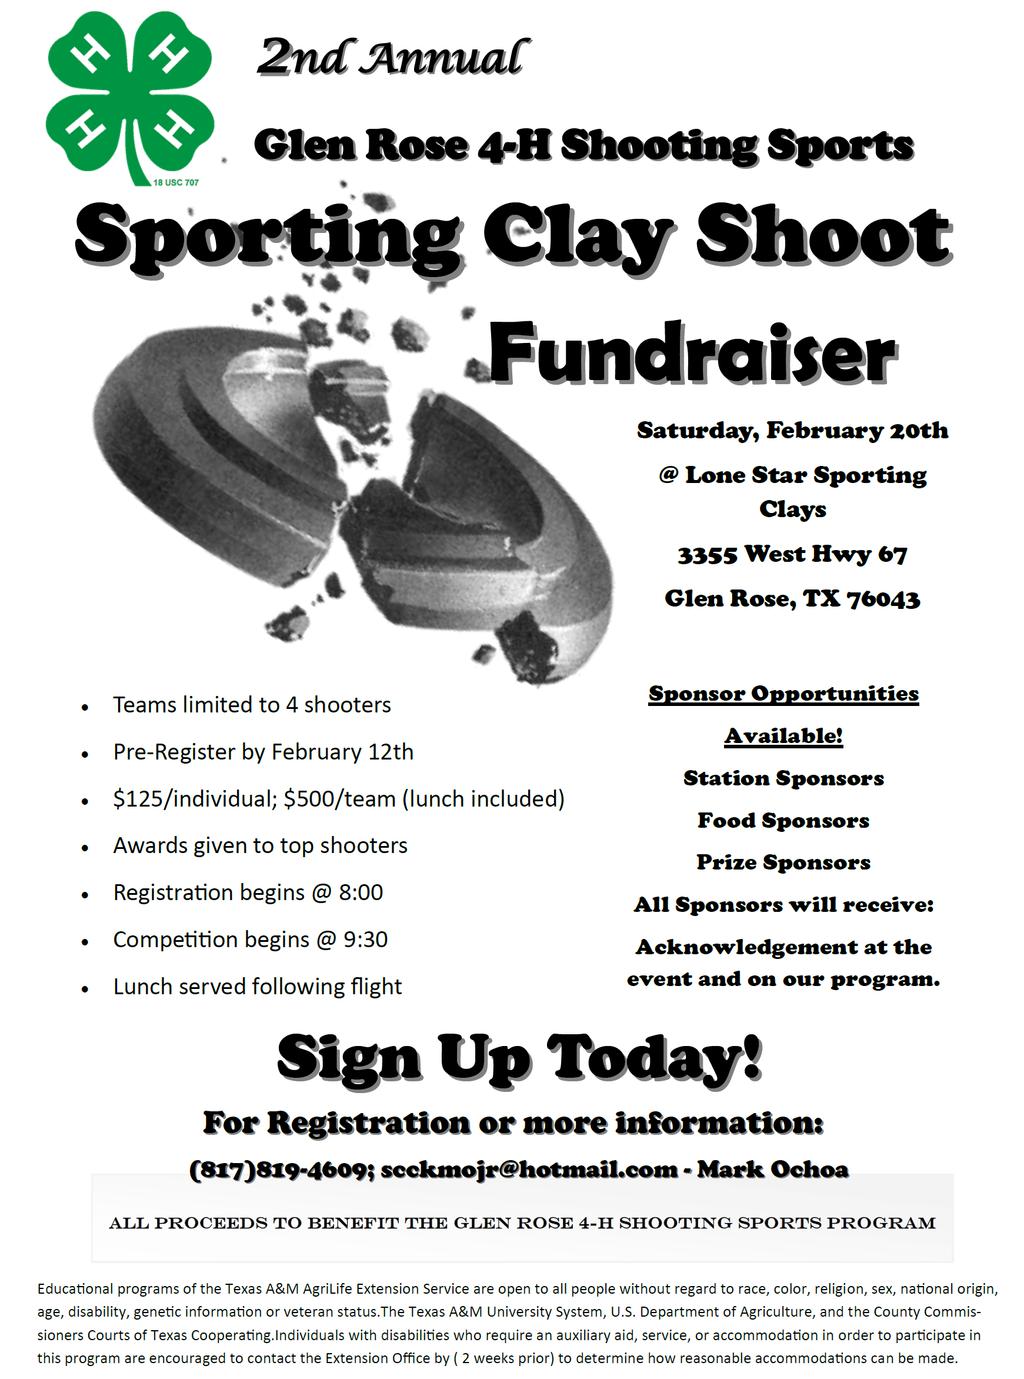 We have lots of new things going on in the Shooting Sports Club. If you want to get involved let us know! Be sure to sign up for Text Reminders!